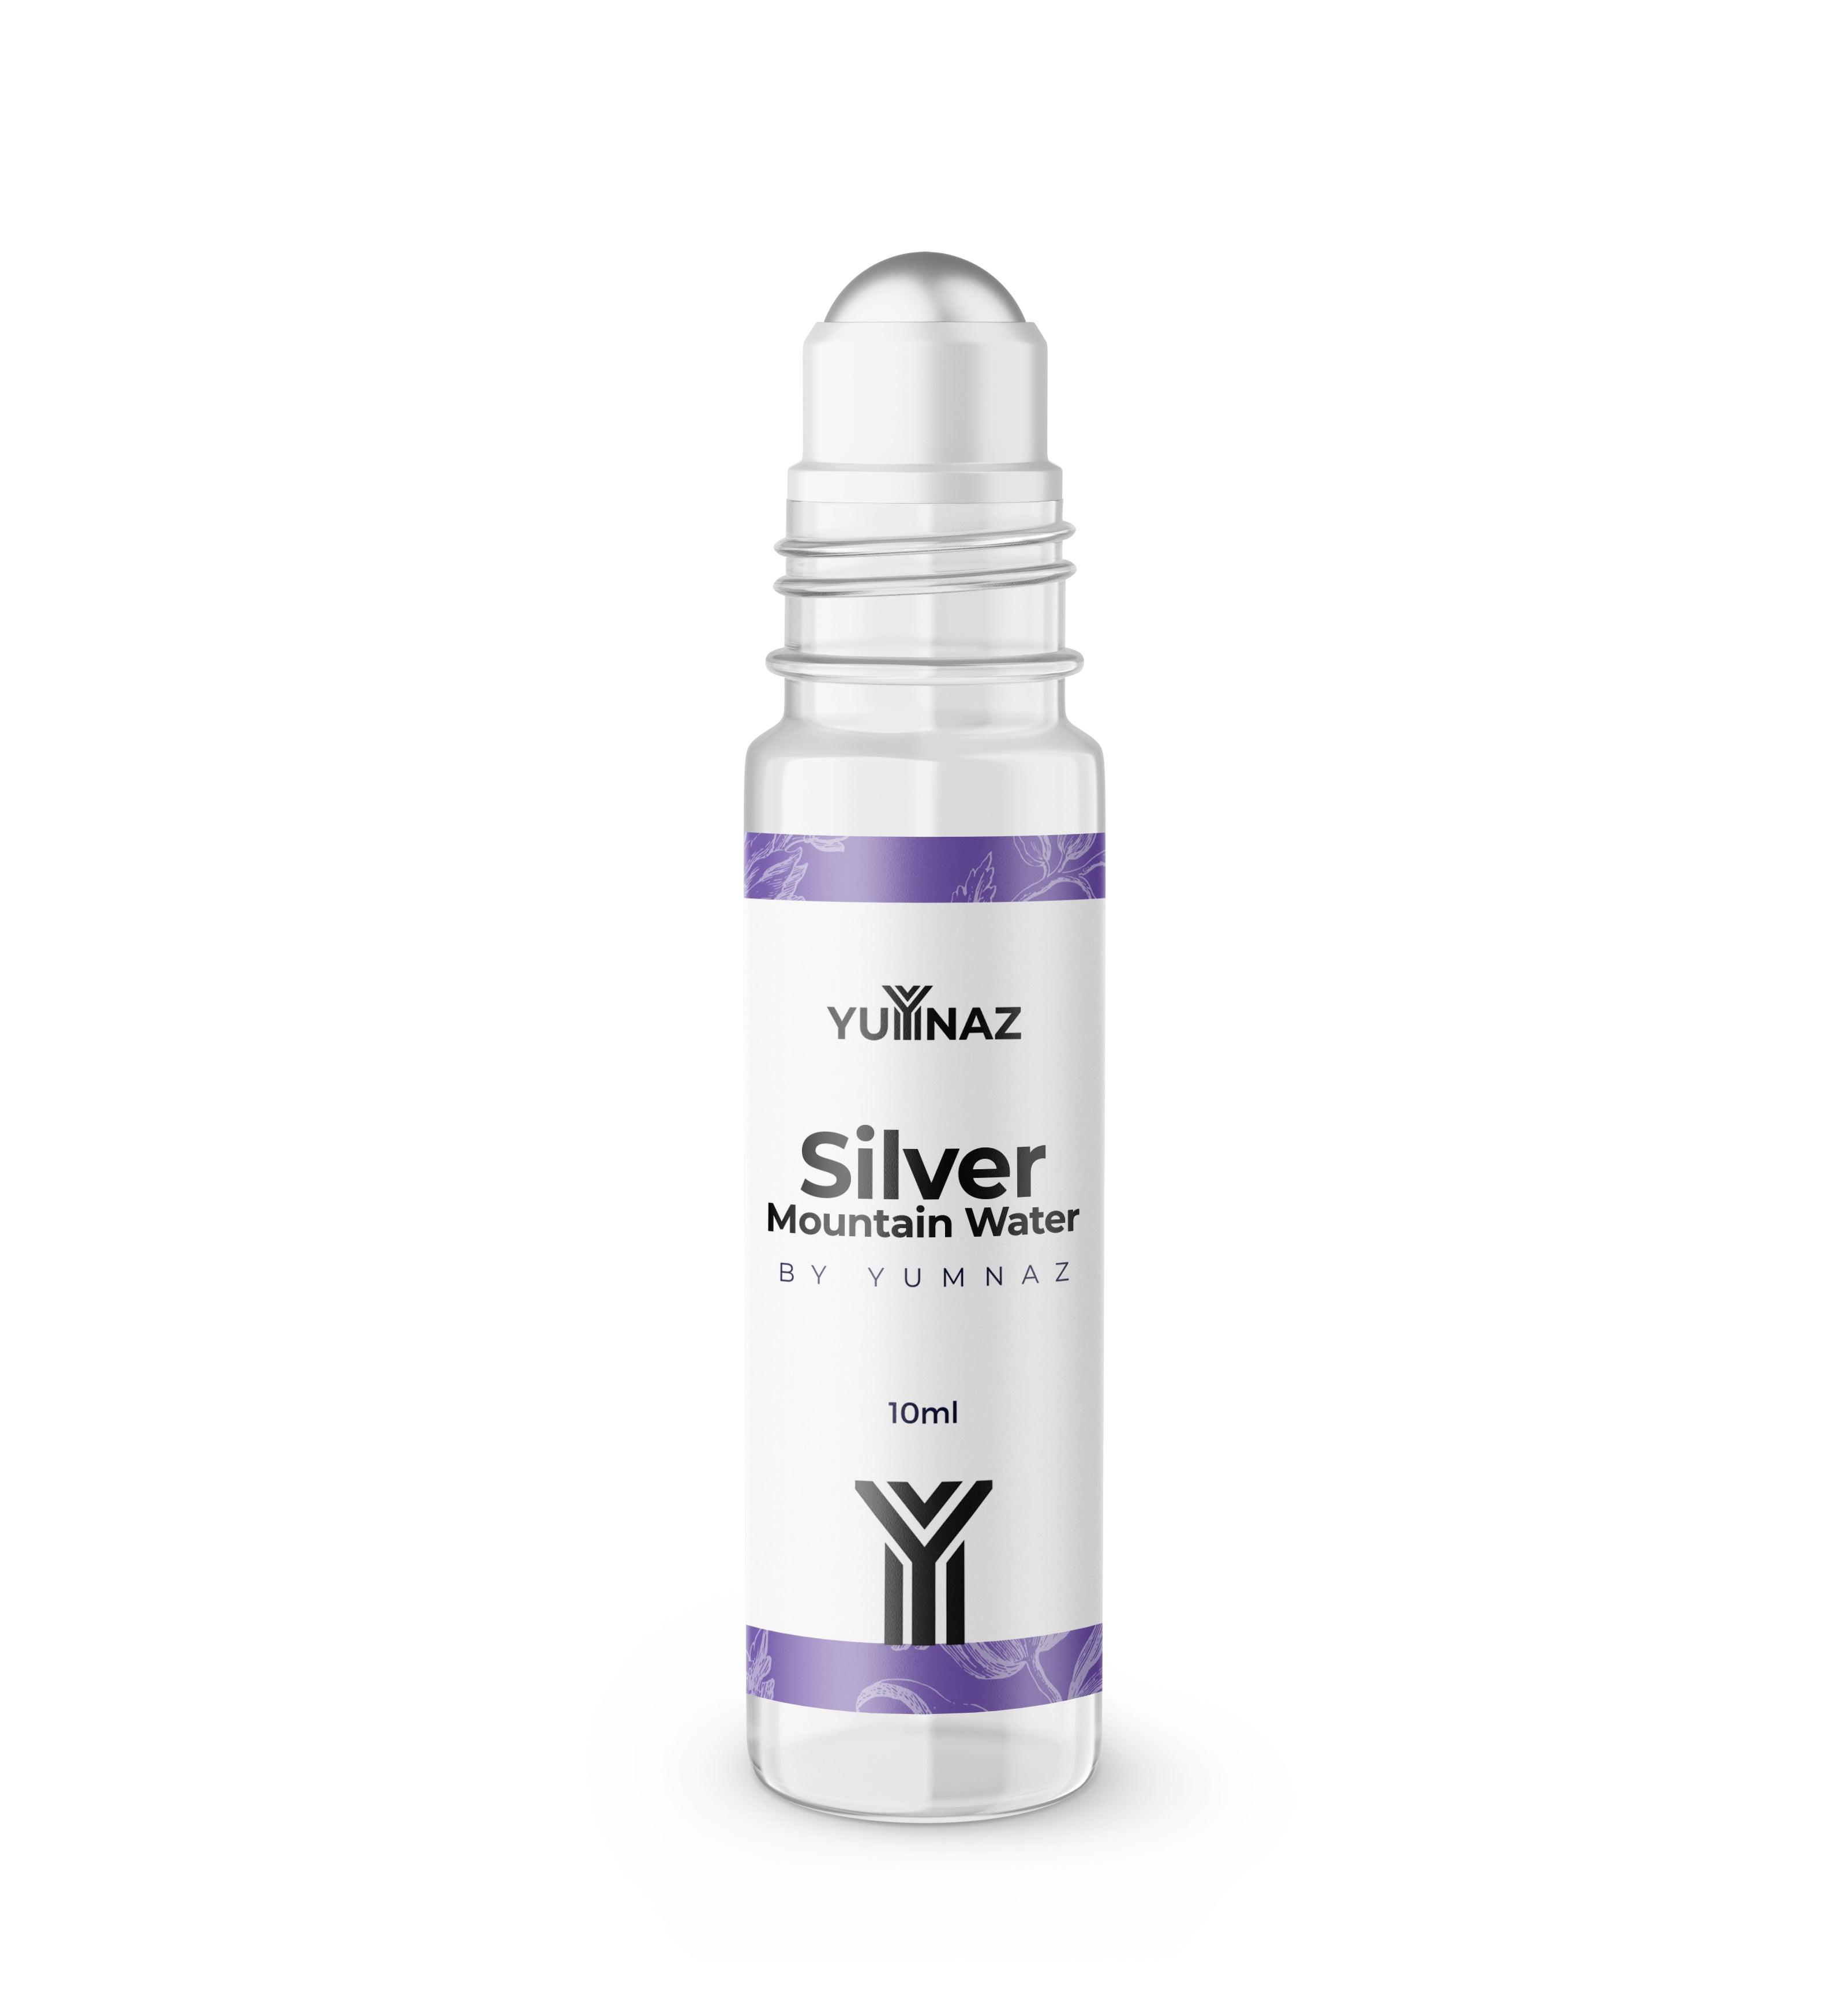 Get the best price of Creed Silver Mountain Water in Pakistan - yumnaz